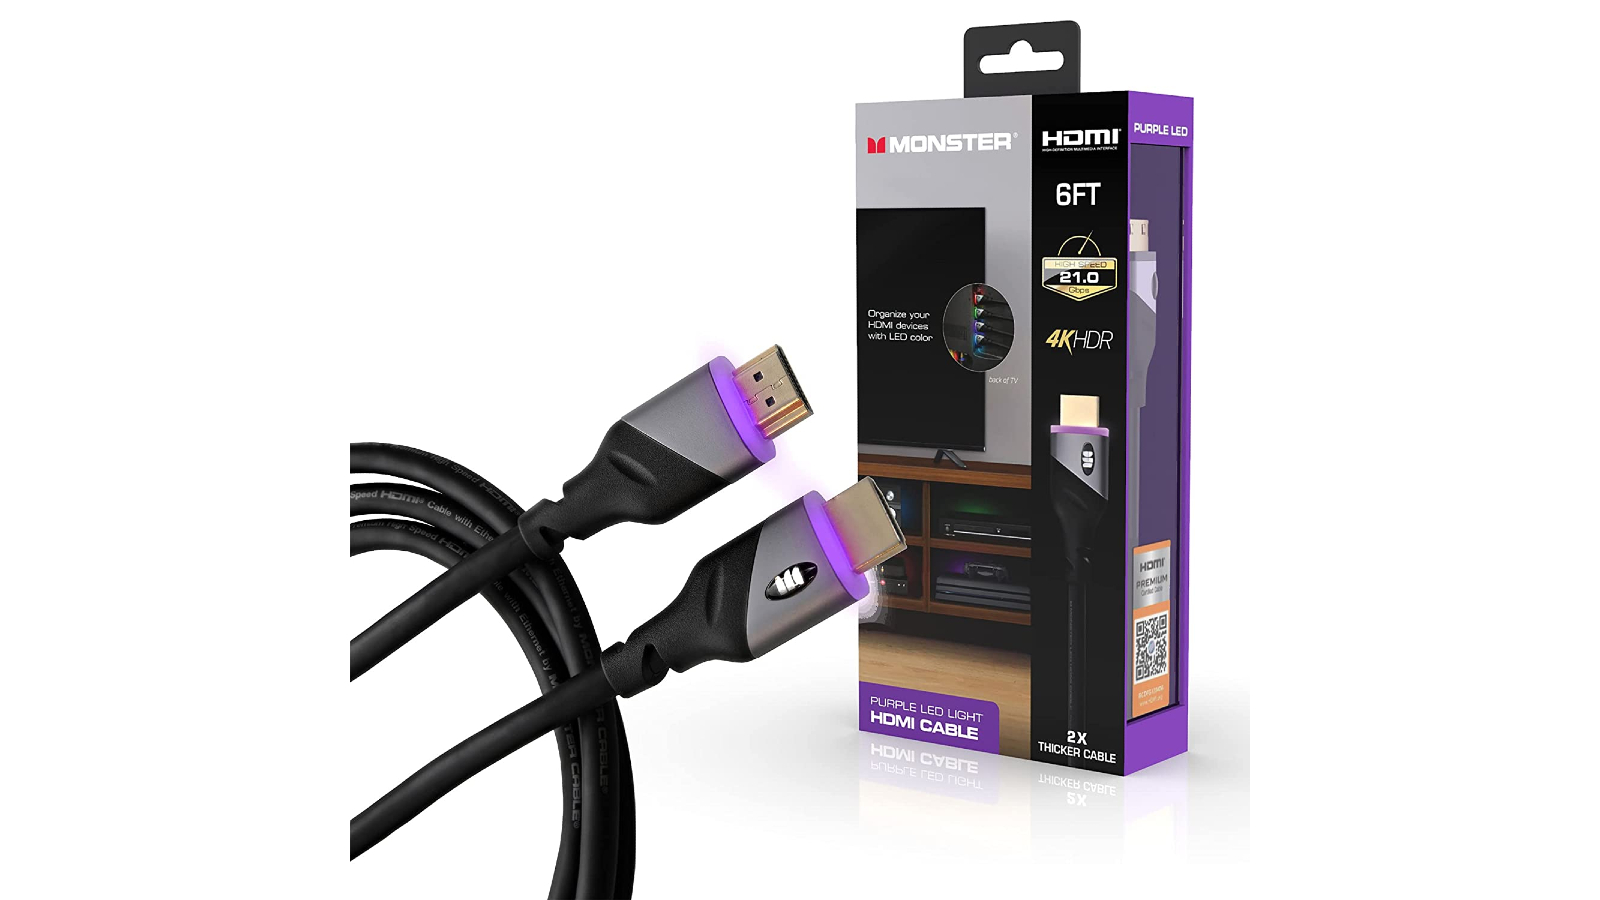 Monster HDMI Cable with built-in LED light - Best for cable management